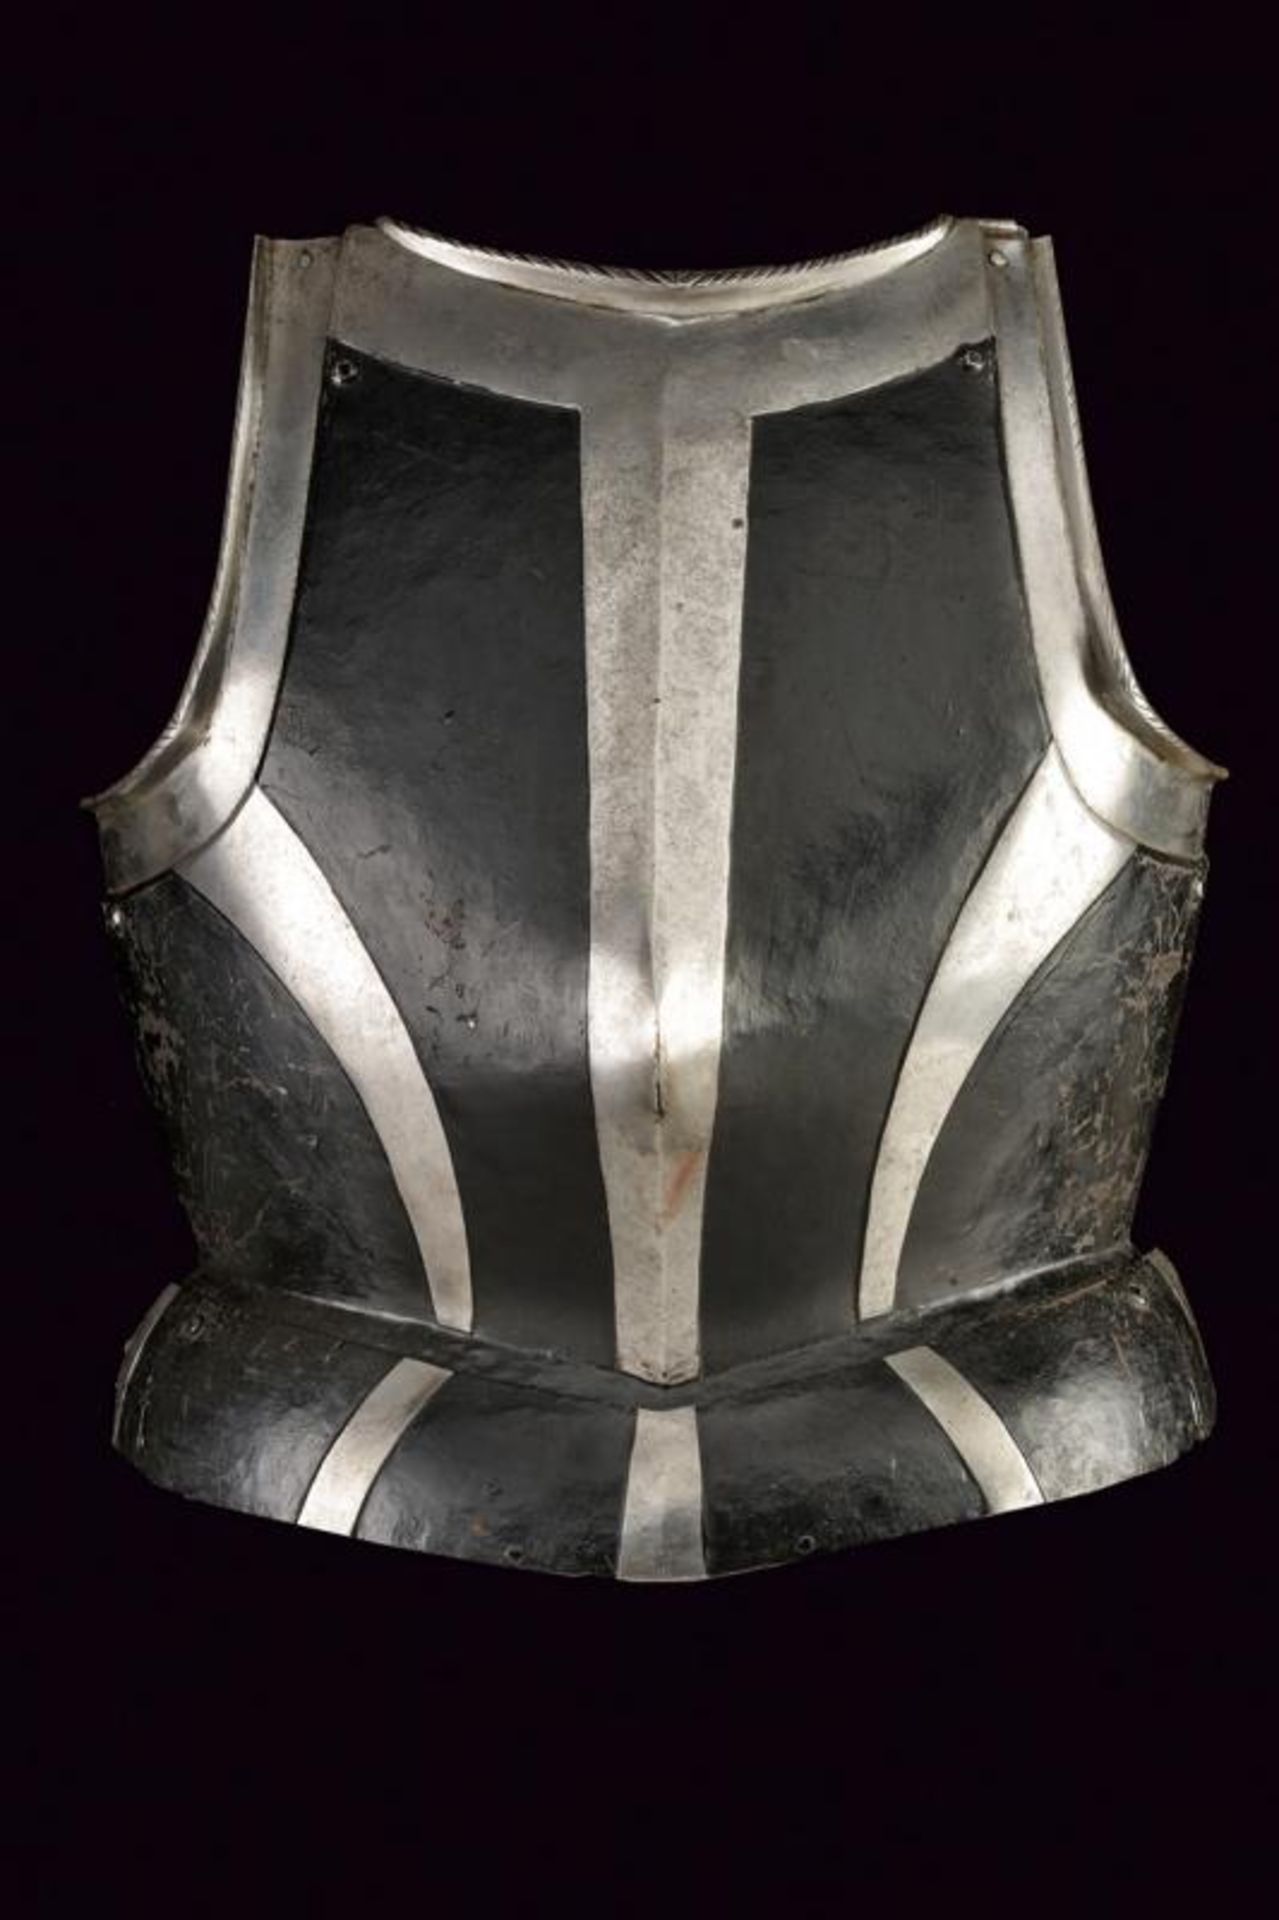 A nice breastplate for a black and white armour